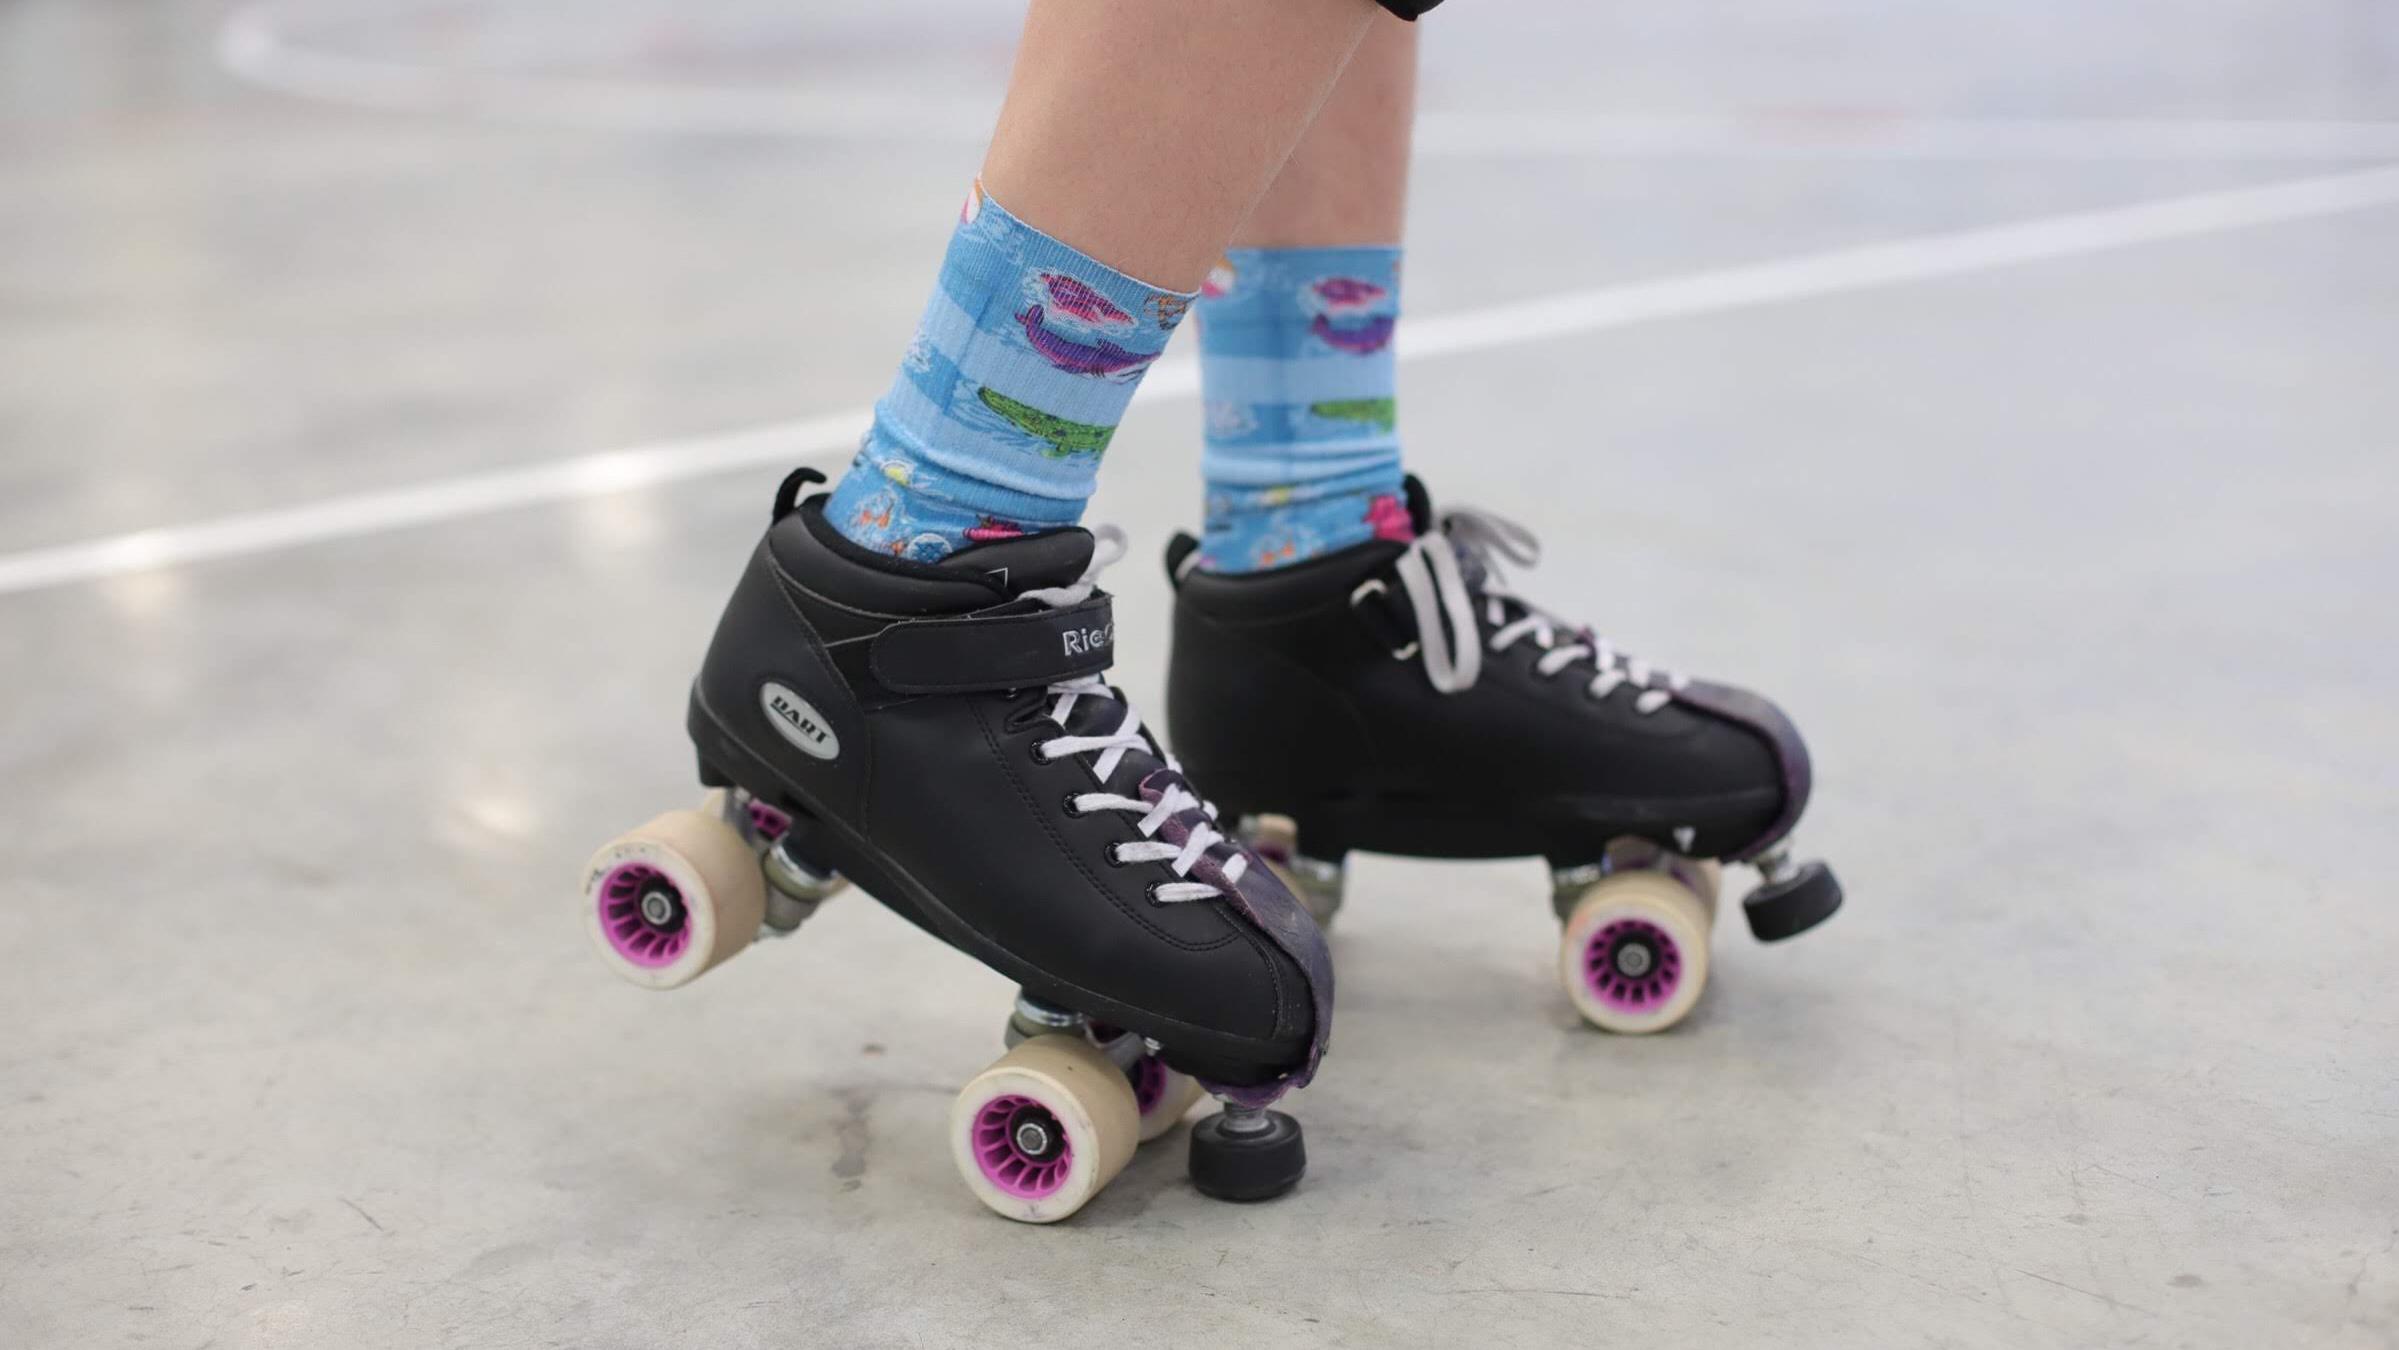 https://images.radio-canada.ca/v1/ici-info/16x9/roller-derby-patins-roulettes-vancouver.JPG